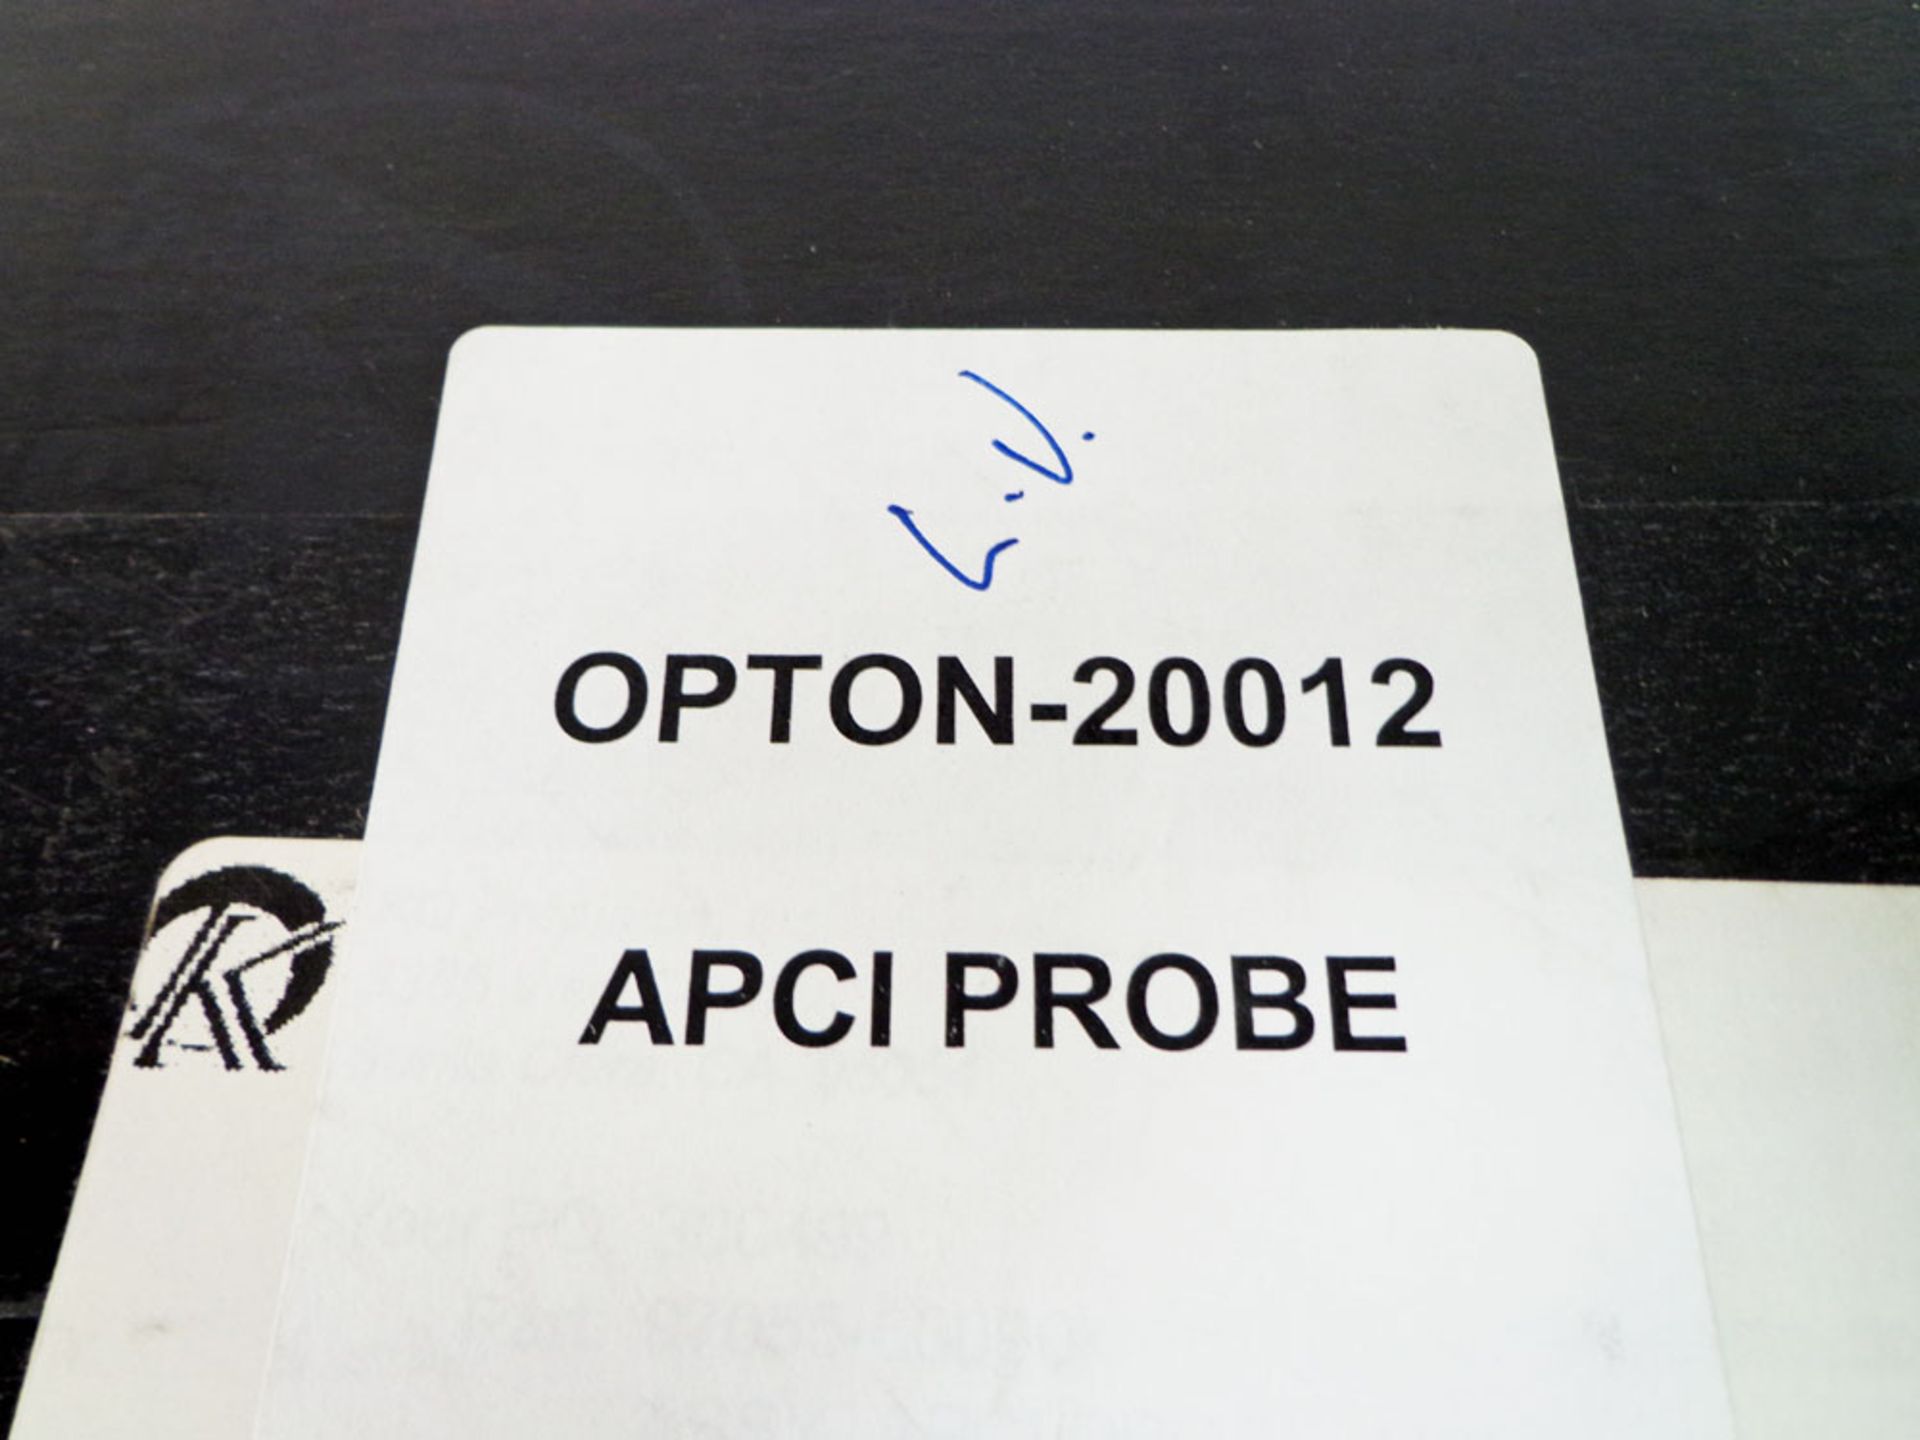 KQ Integrated Solutions APCI Probe OPTON-20012, P/N 97055-60090 Rev A - Image 7 of 7